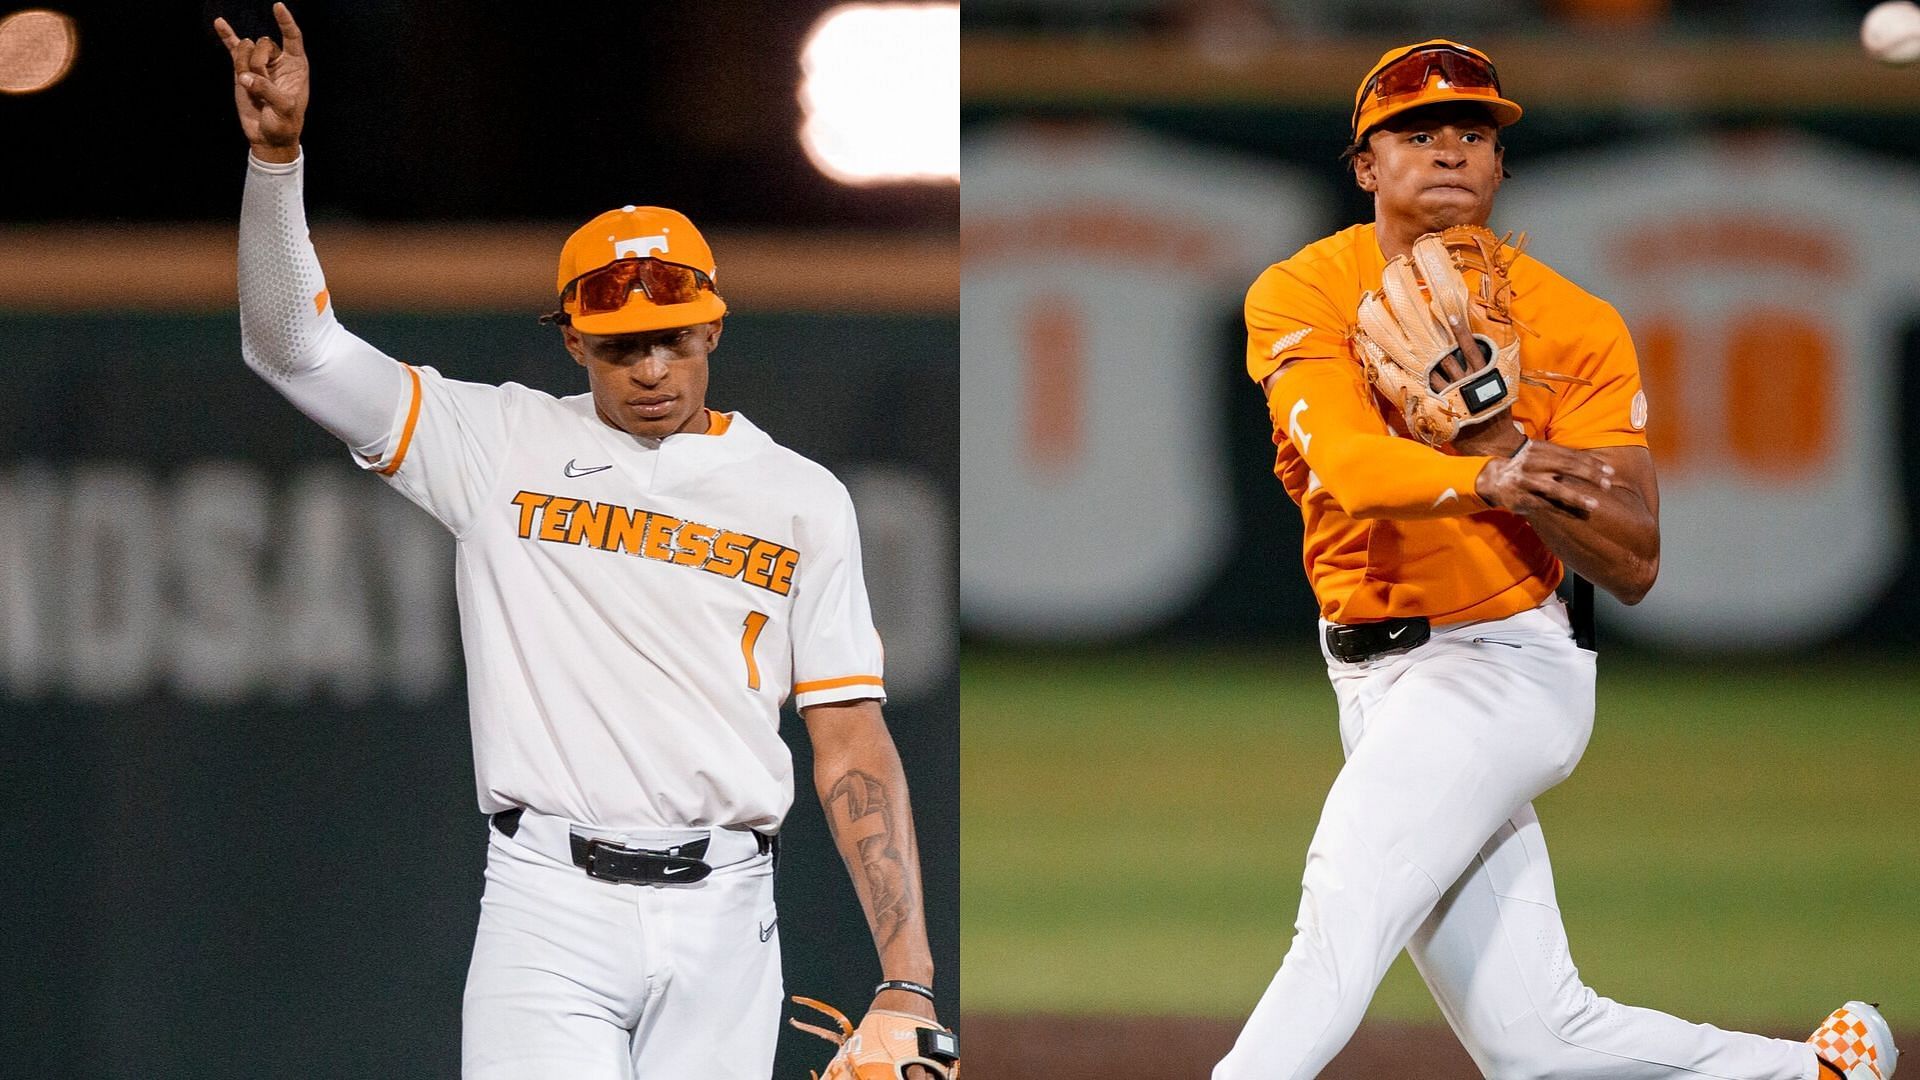 Images courtesy of Tennessee Athletics